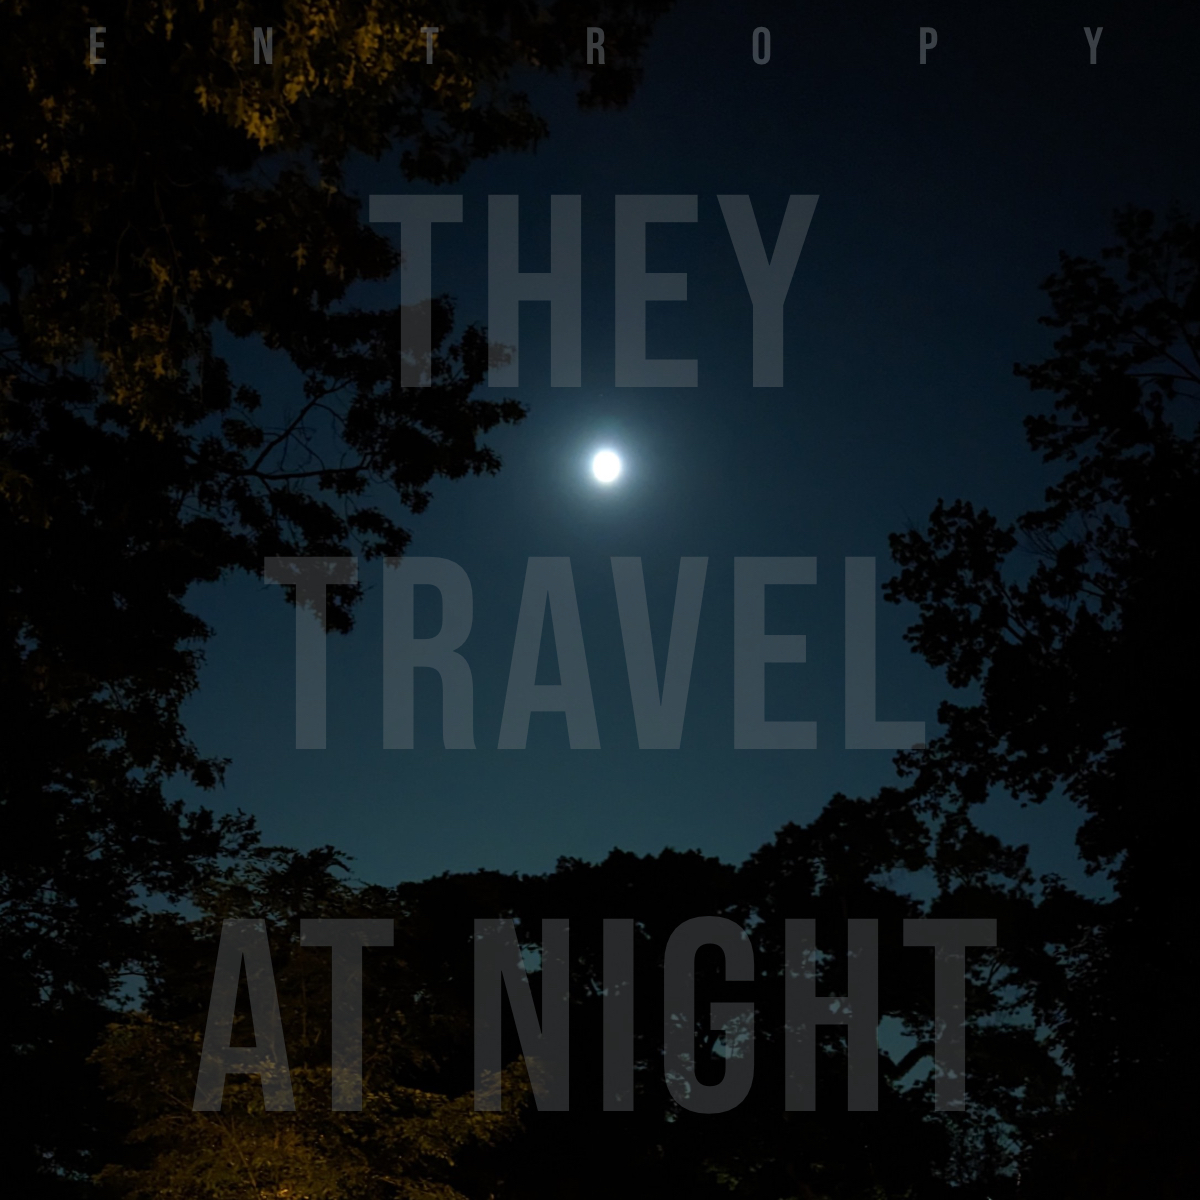 They Travel at Night ‘Entropy’ EP album artwork